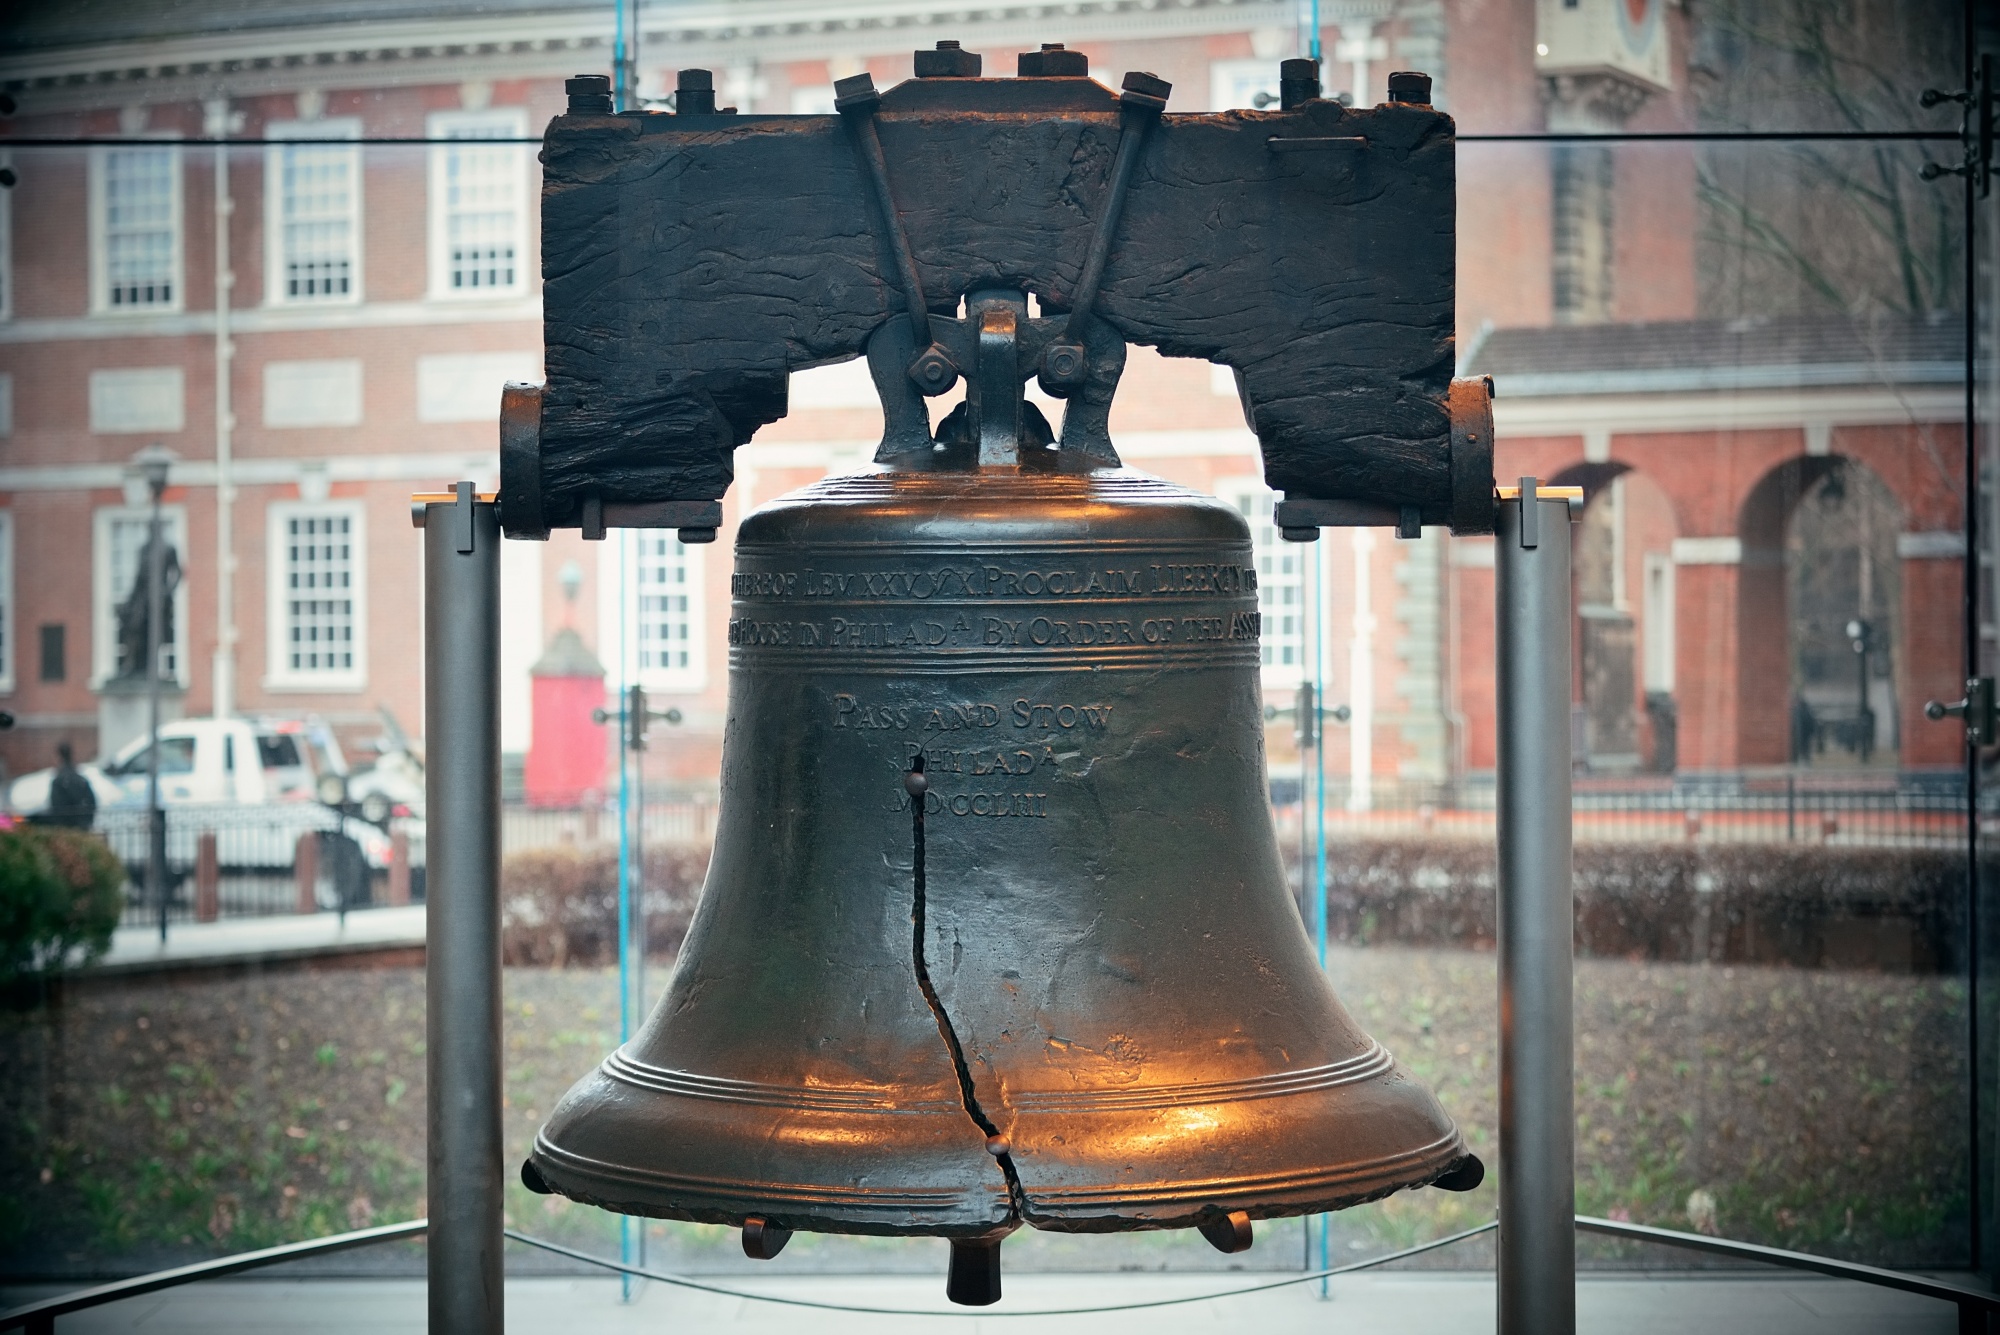 travel destinations for foodies, the Liberty Bell in Philadelphia, Pennsylvania